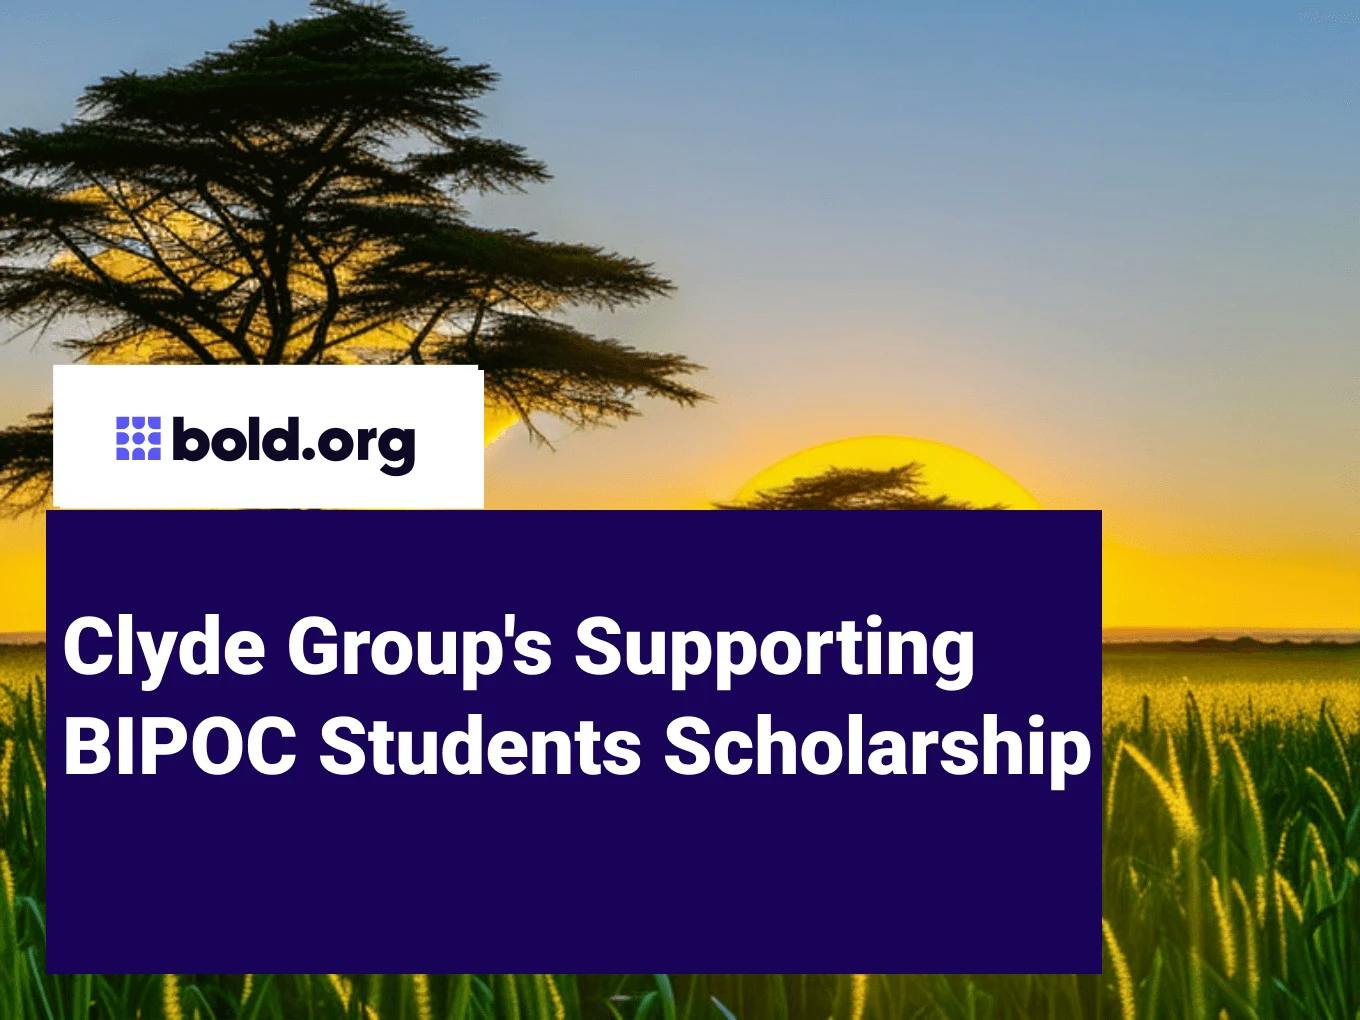 Clyde Group's Supporting BIPOC Students Scholarship